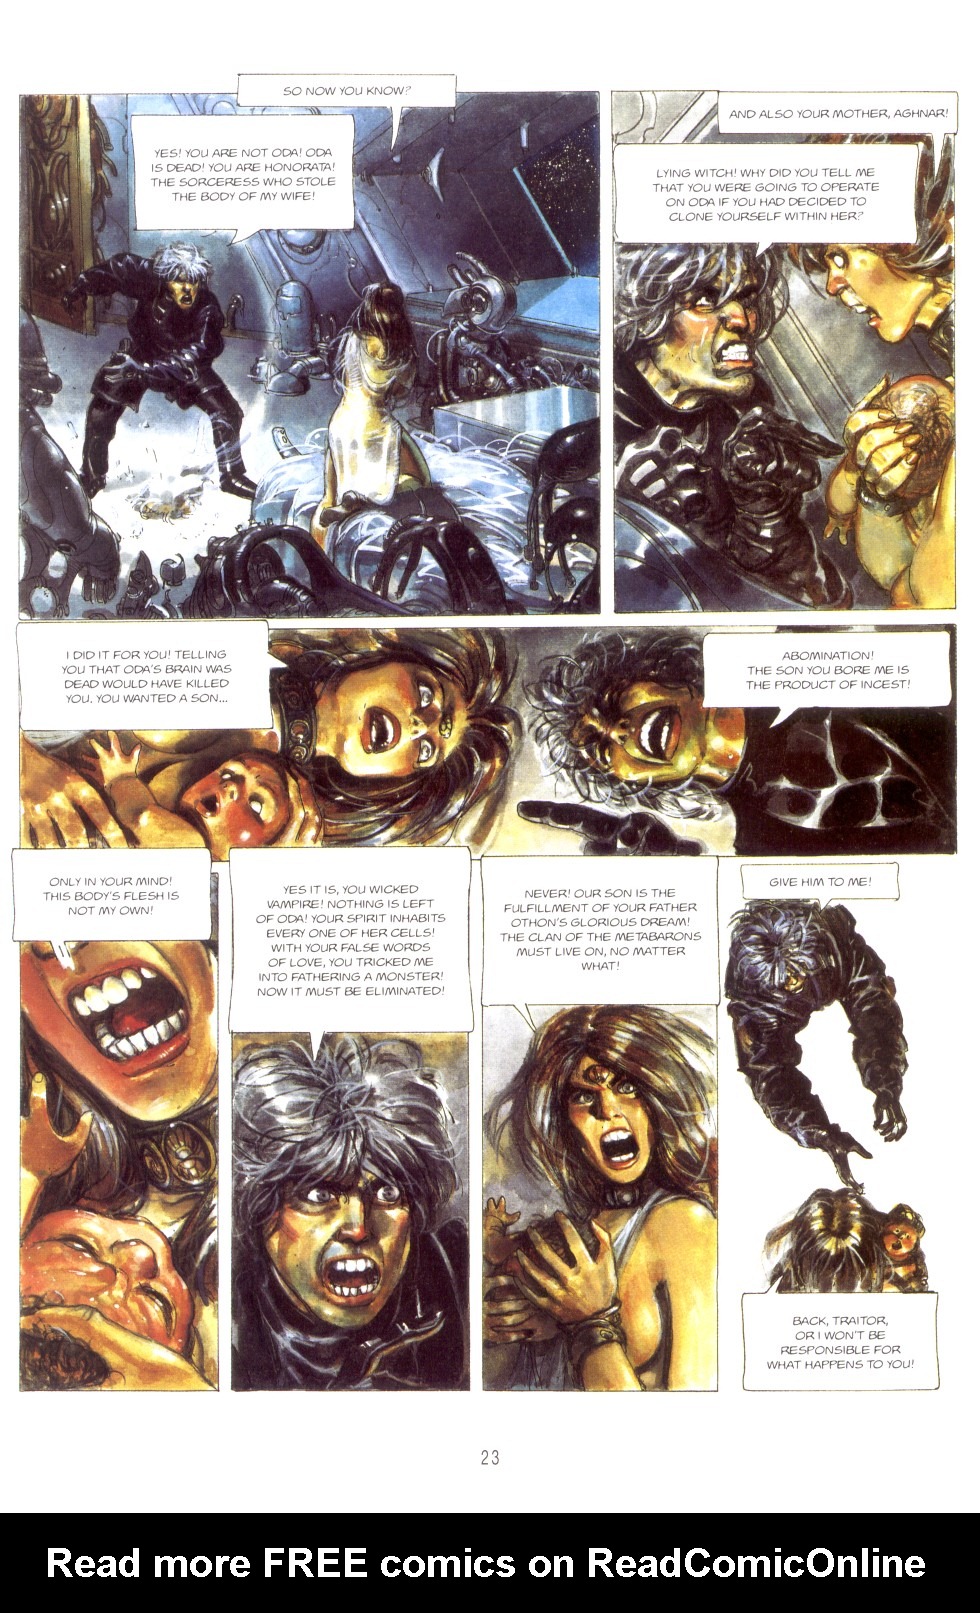 Read Online The Metabarons Comic Issue 8 The Posession Of Oda